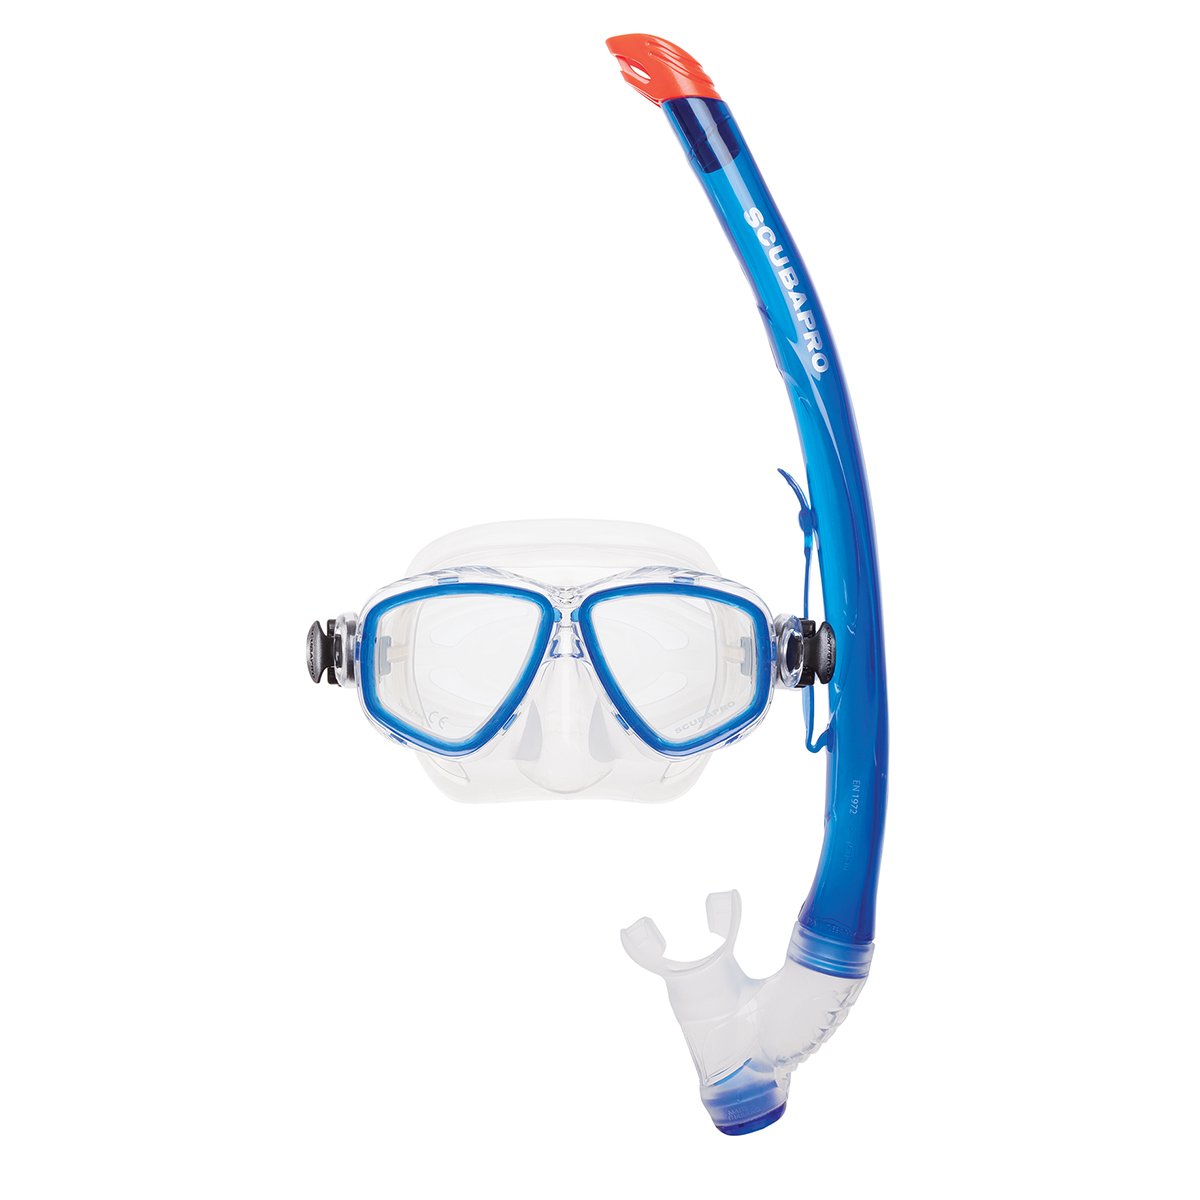 Used Scubapro Ecco Mask with Snorkeling Combo